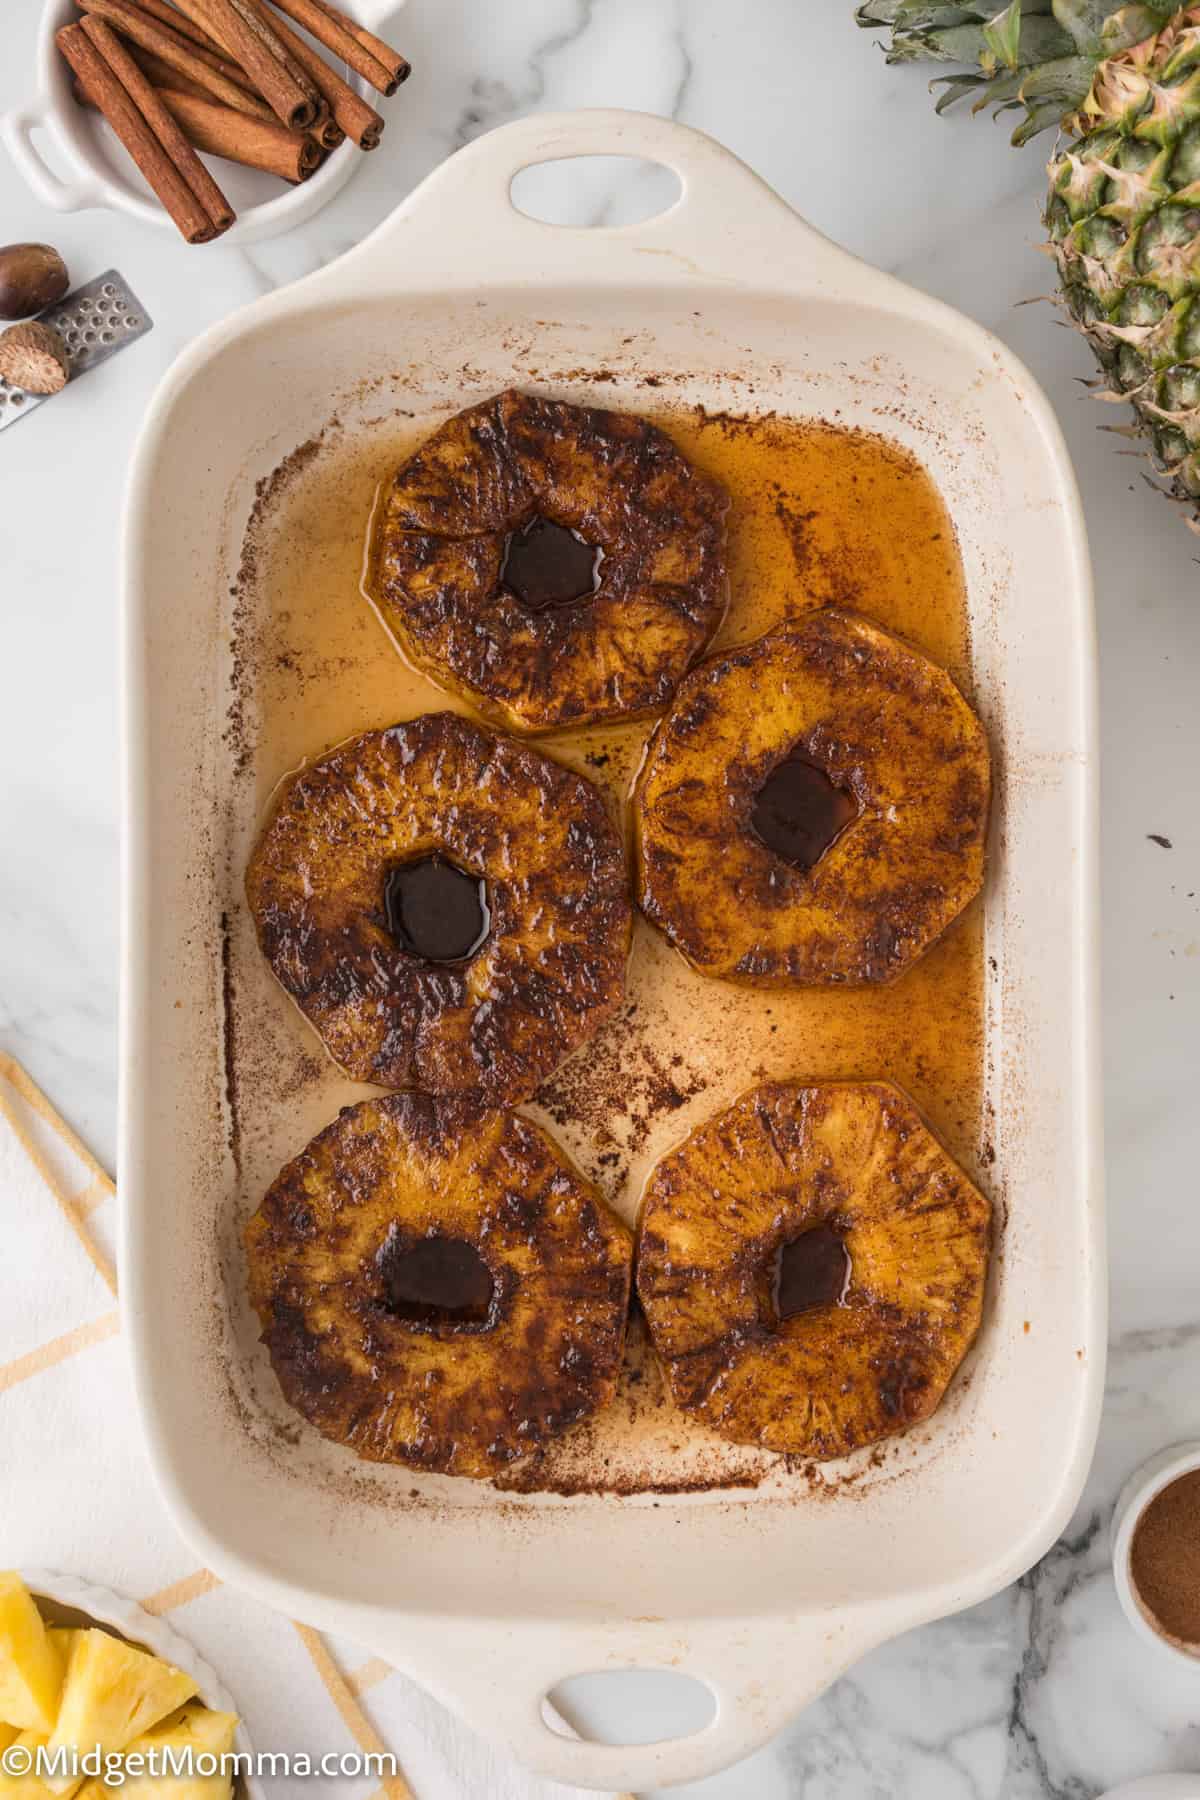 Baked pineapple slices with cinnamon in a white baking dish, surrounded by pineapple and cinnamon sticks on a marble countertop.